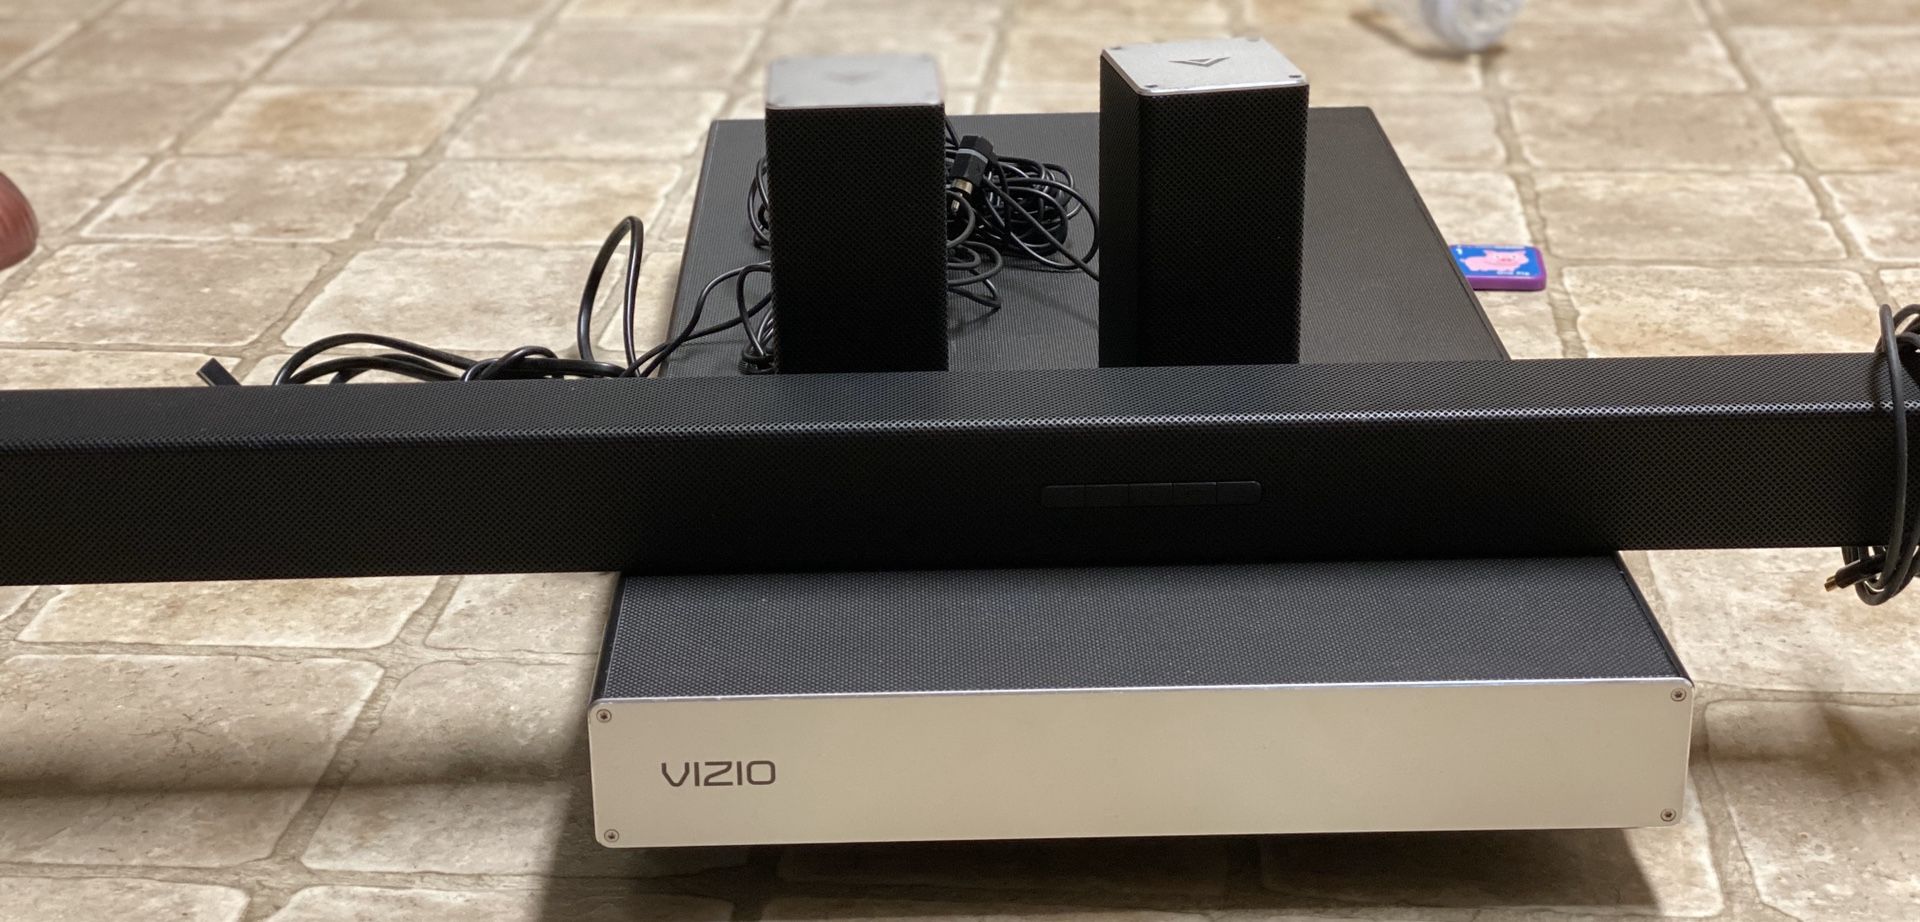 Visio smartcast 5.1 channel with sub woofer